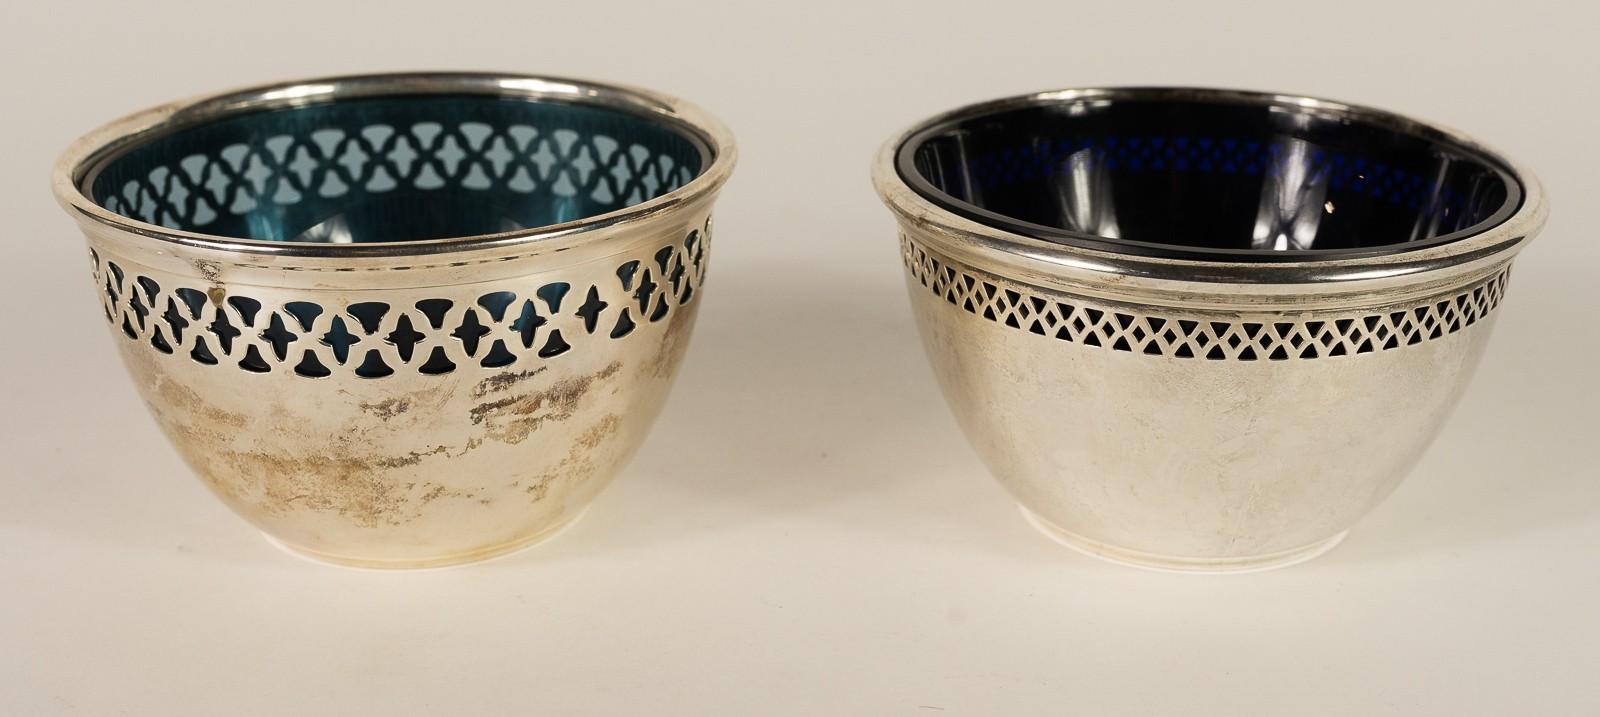 TWO BIRKS STERLING CONDIMENT BOWLS